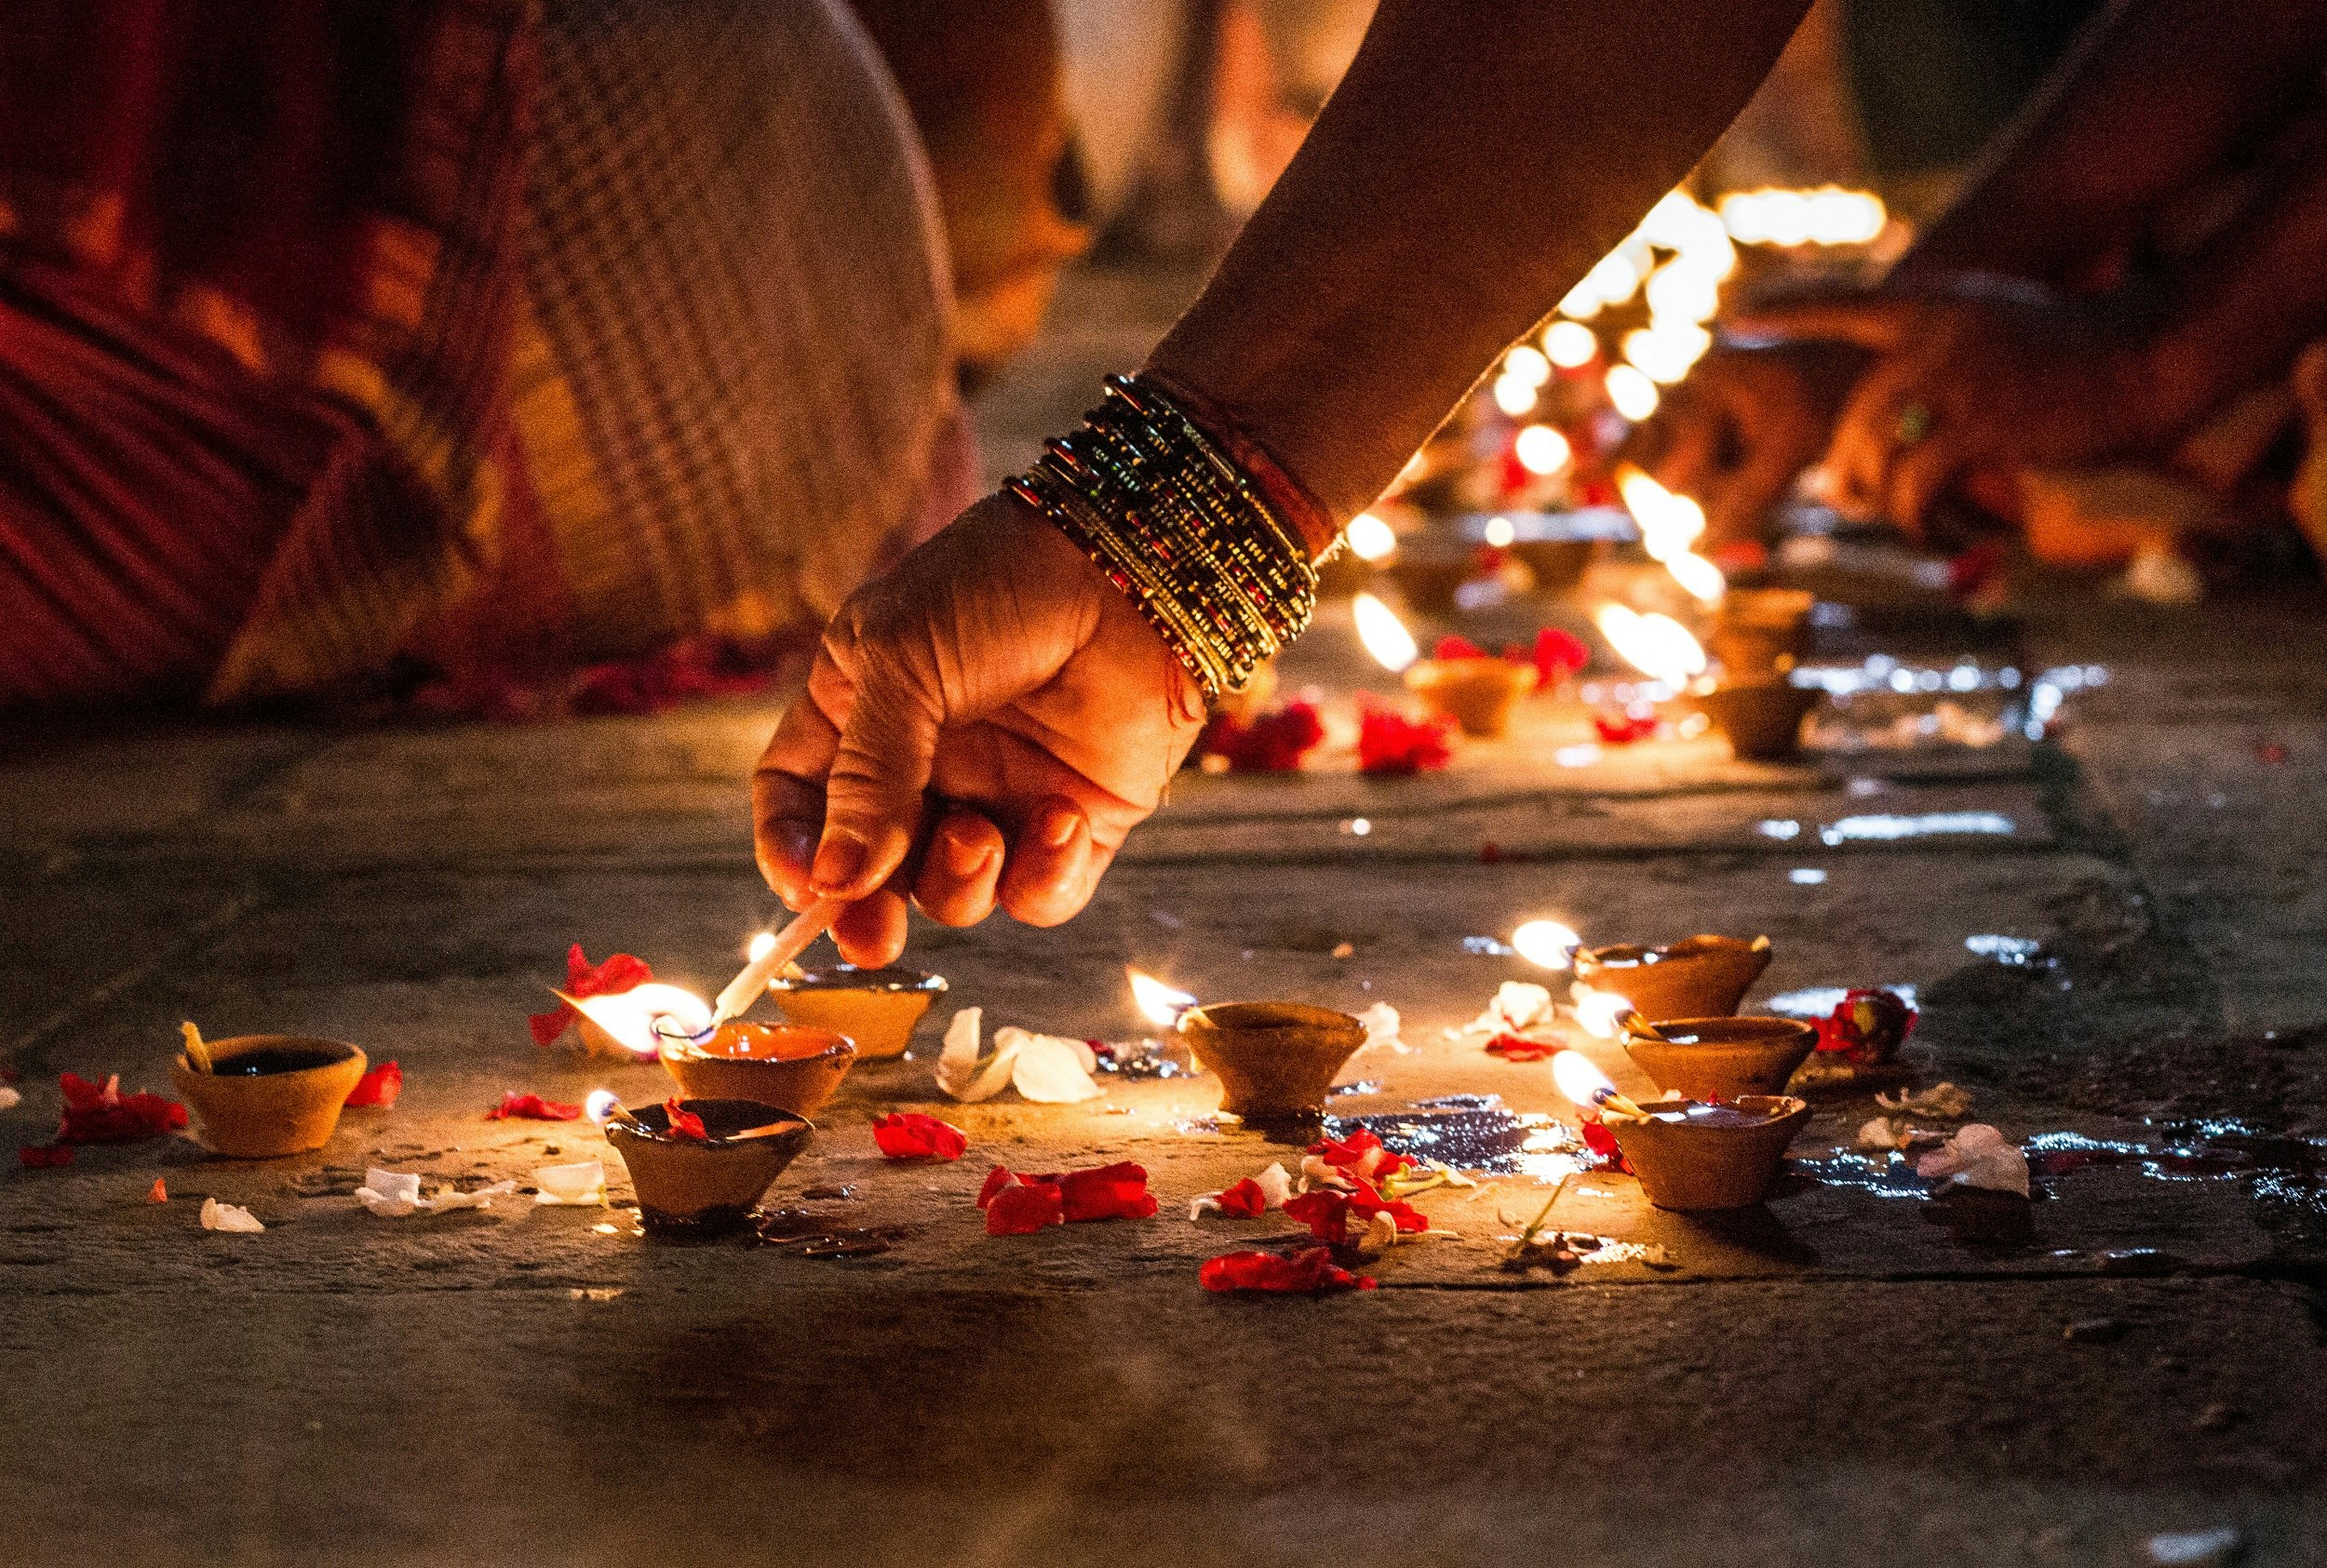 An arm with many bracelets reaches down with a little candle in hand to light some small candles in tiny clay containers; in the distance are countless similar containers glowing with flame.